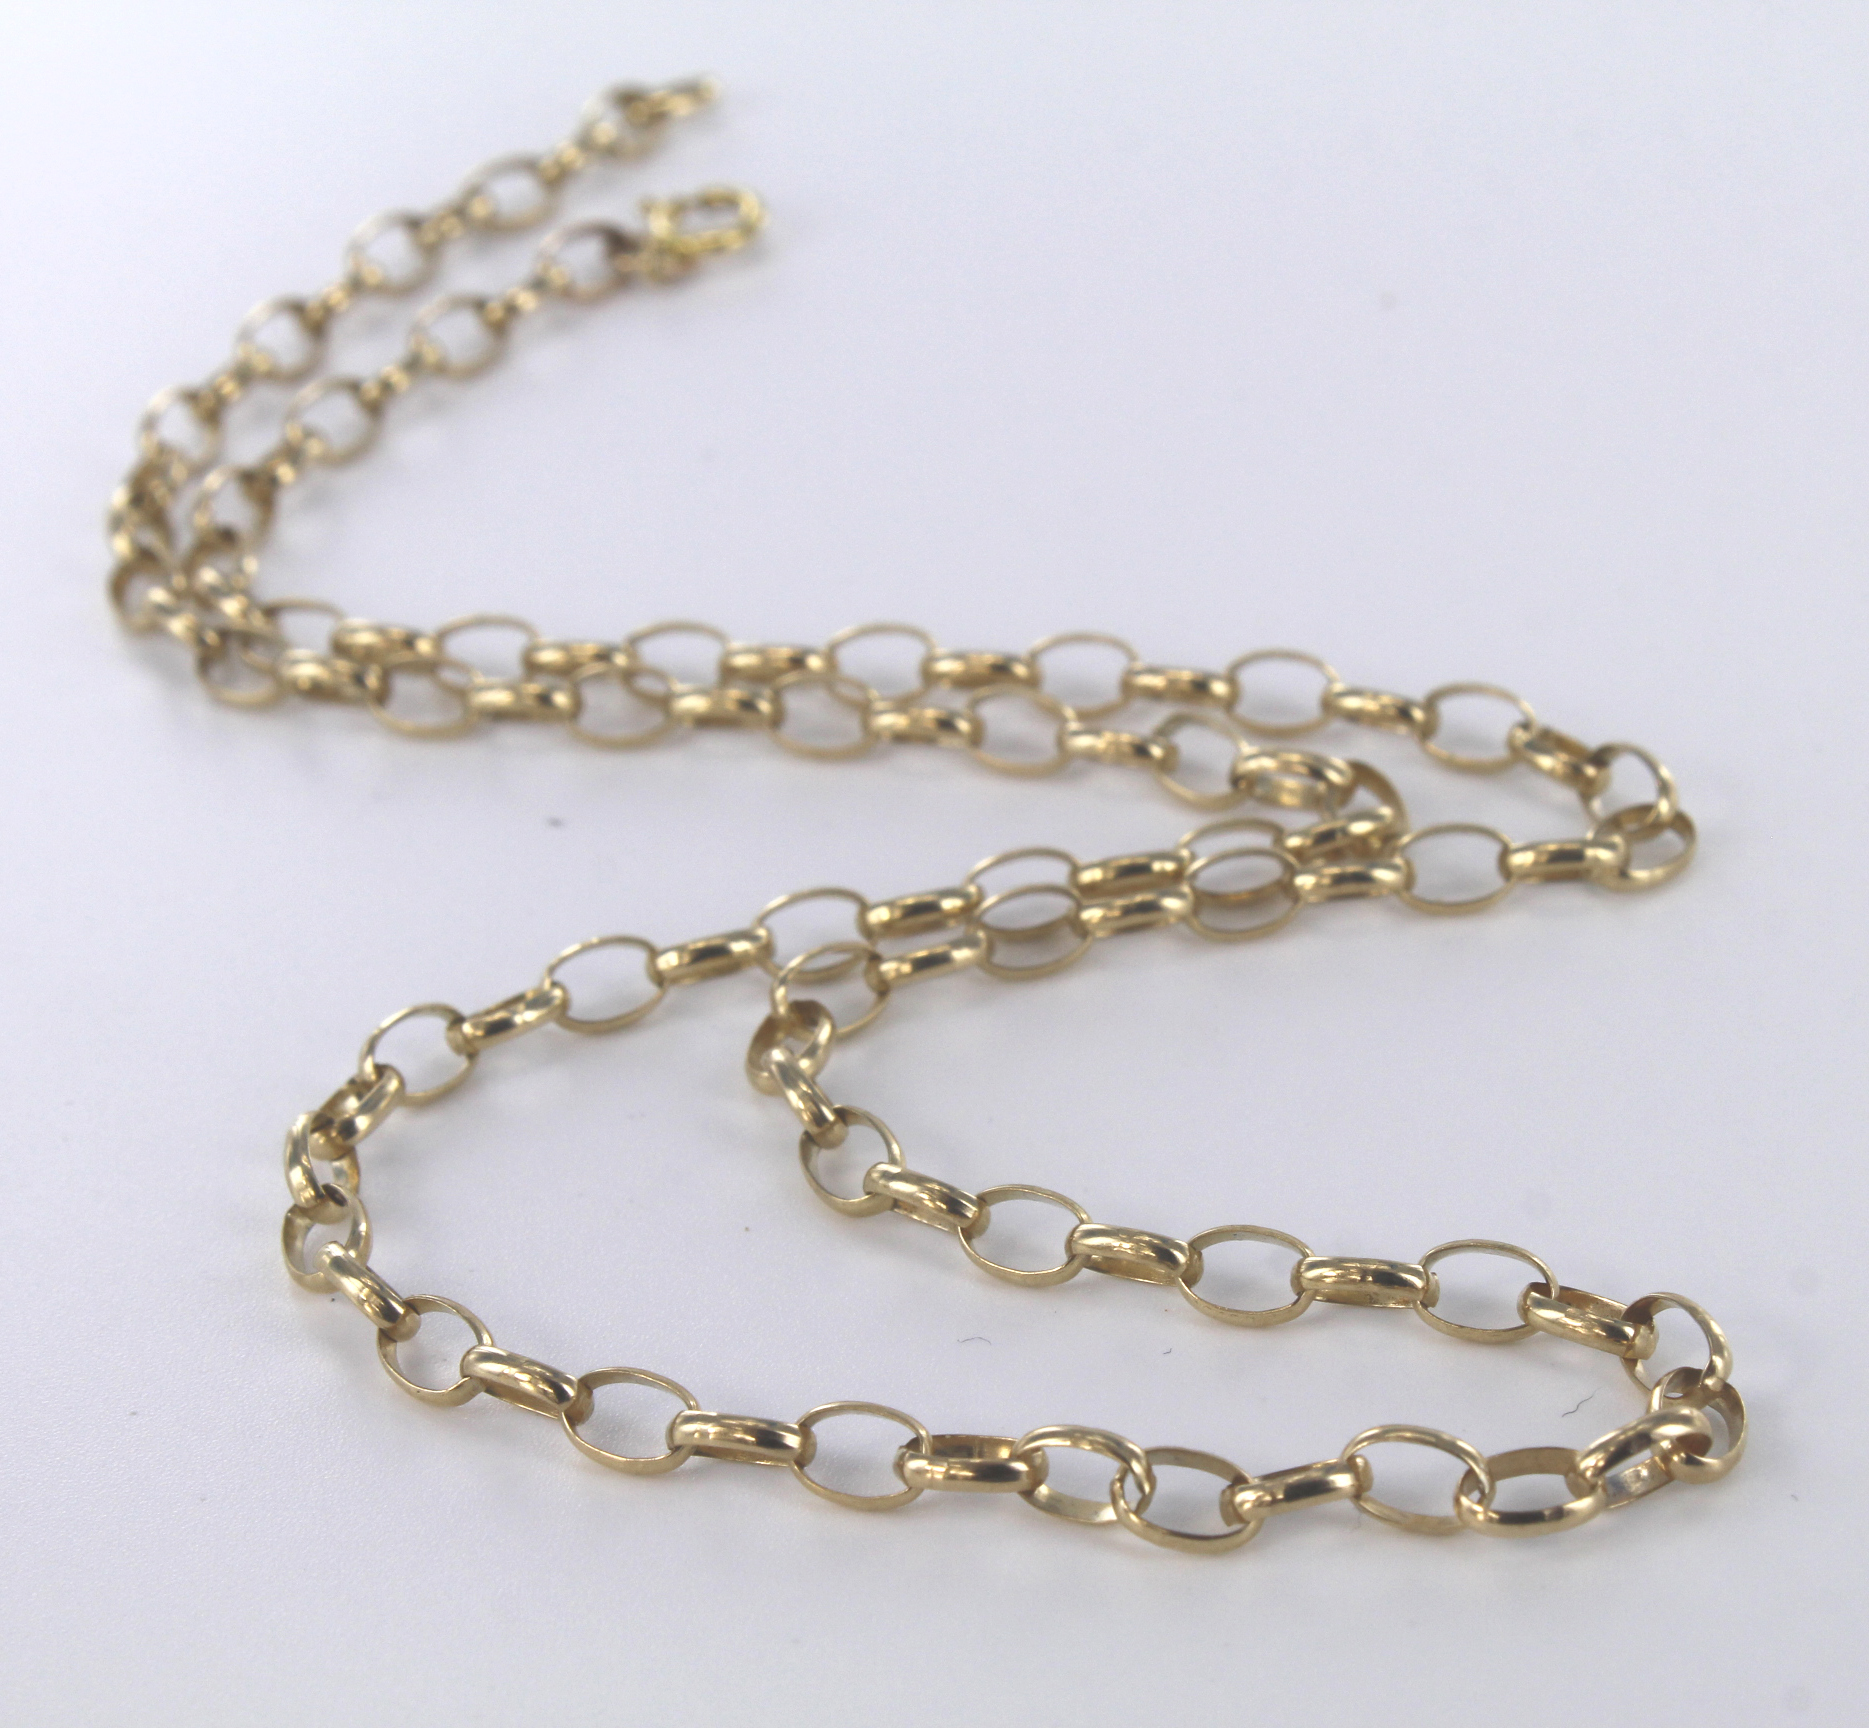 9ct yellow gold belcher link chain necklace with bolt ring clasp, length 45cm, weight 6.5g